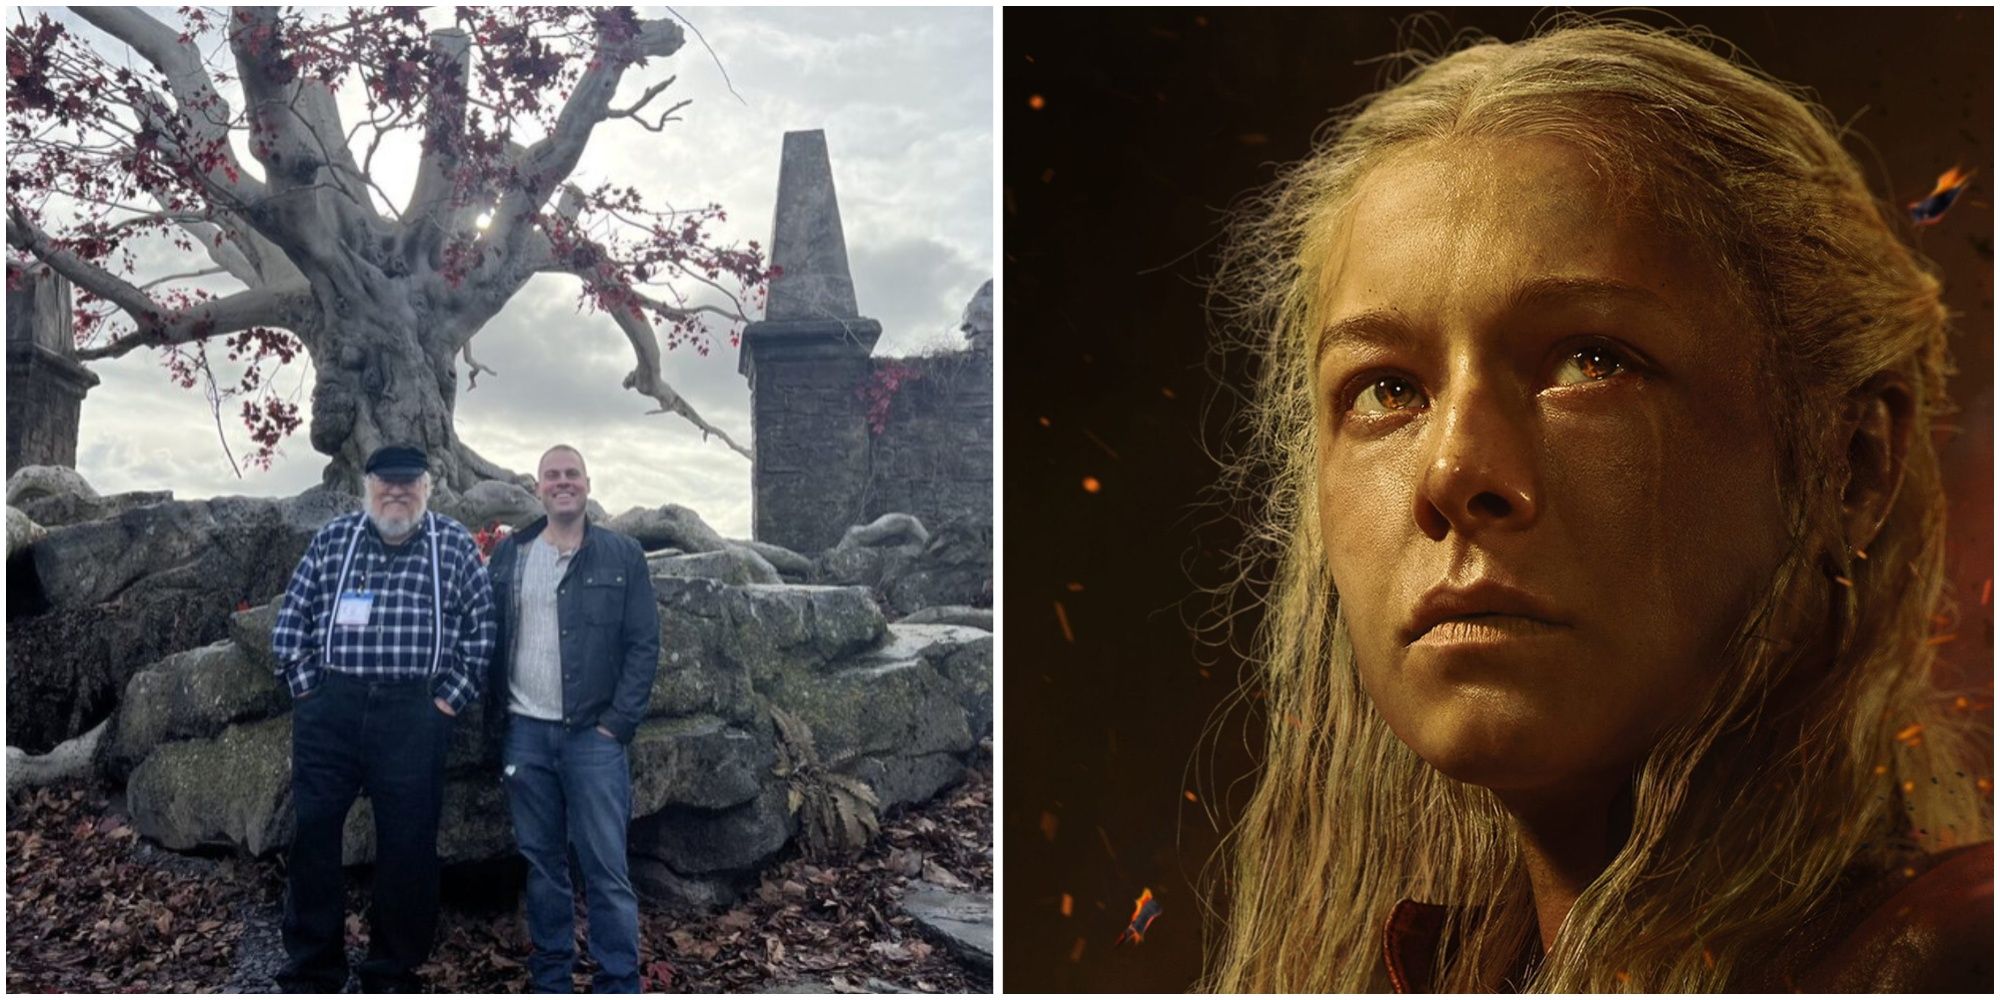 Split images of George R.R. Martin and Ryan Condal on the House of the Dragon set and Rhaenyra Targaryen from the season 2 poster. 